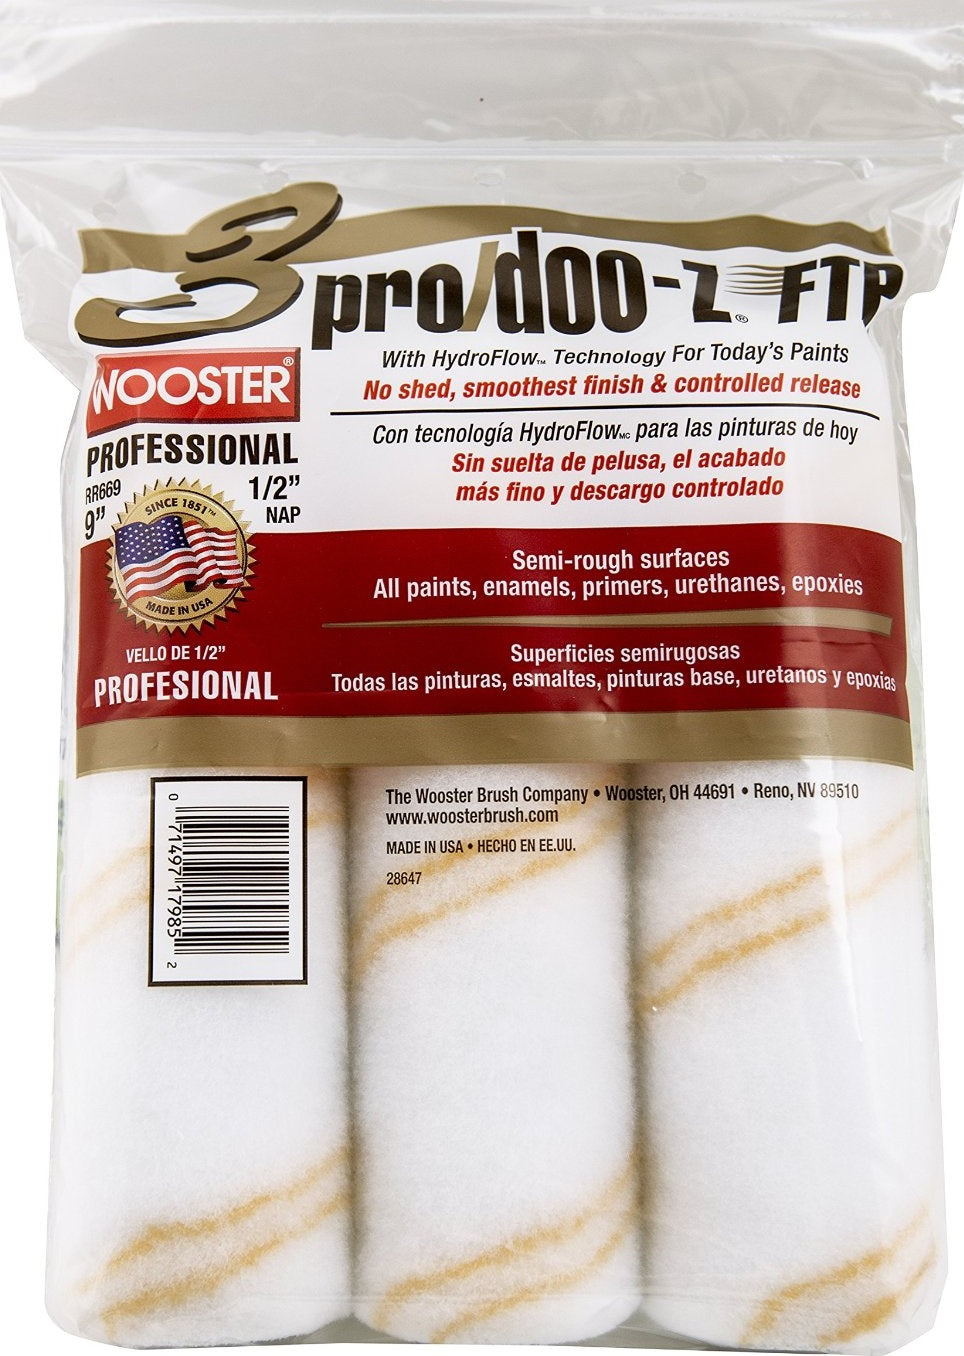 Wooster RR669-9 Pro Doo Z FTP Paint Roller Cover, 9 x 1/2"